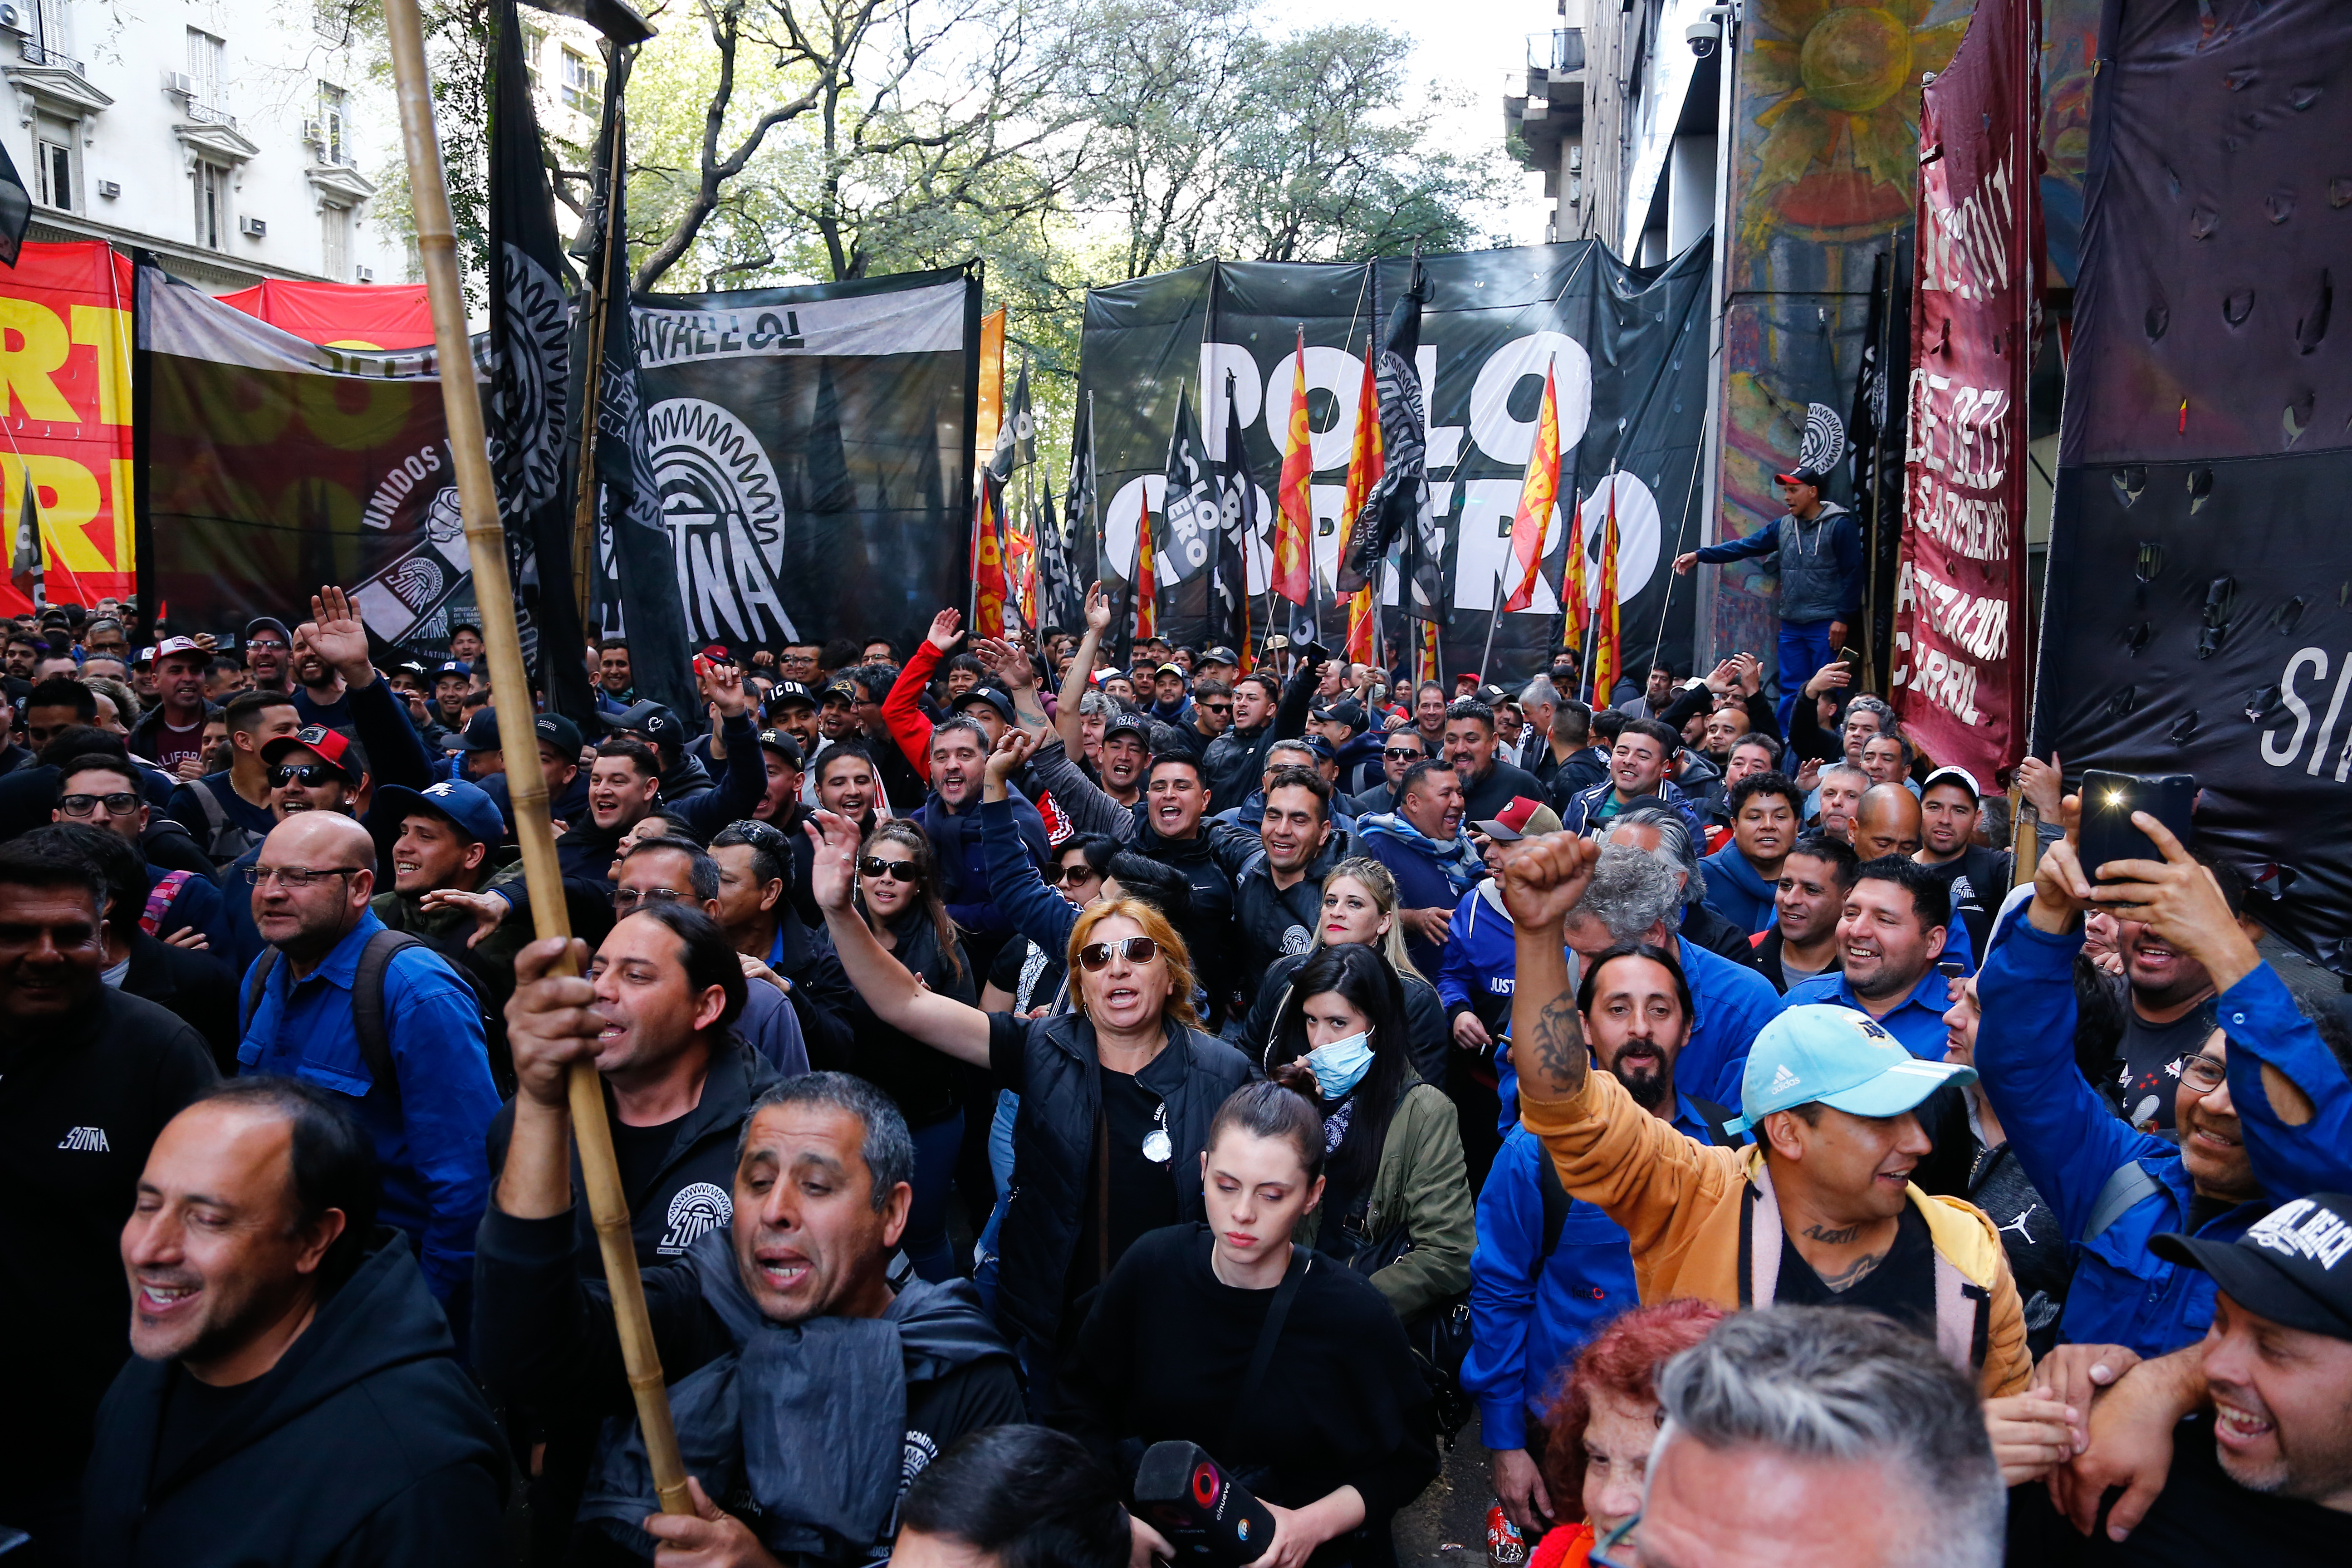 Thousands Of Left-Wing Extremists Were Present At The Door Of The Labor Ministry (Luciano Gonzalez).